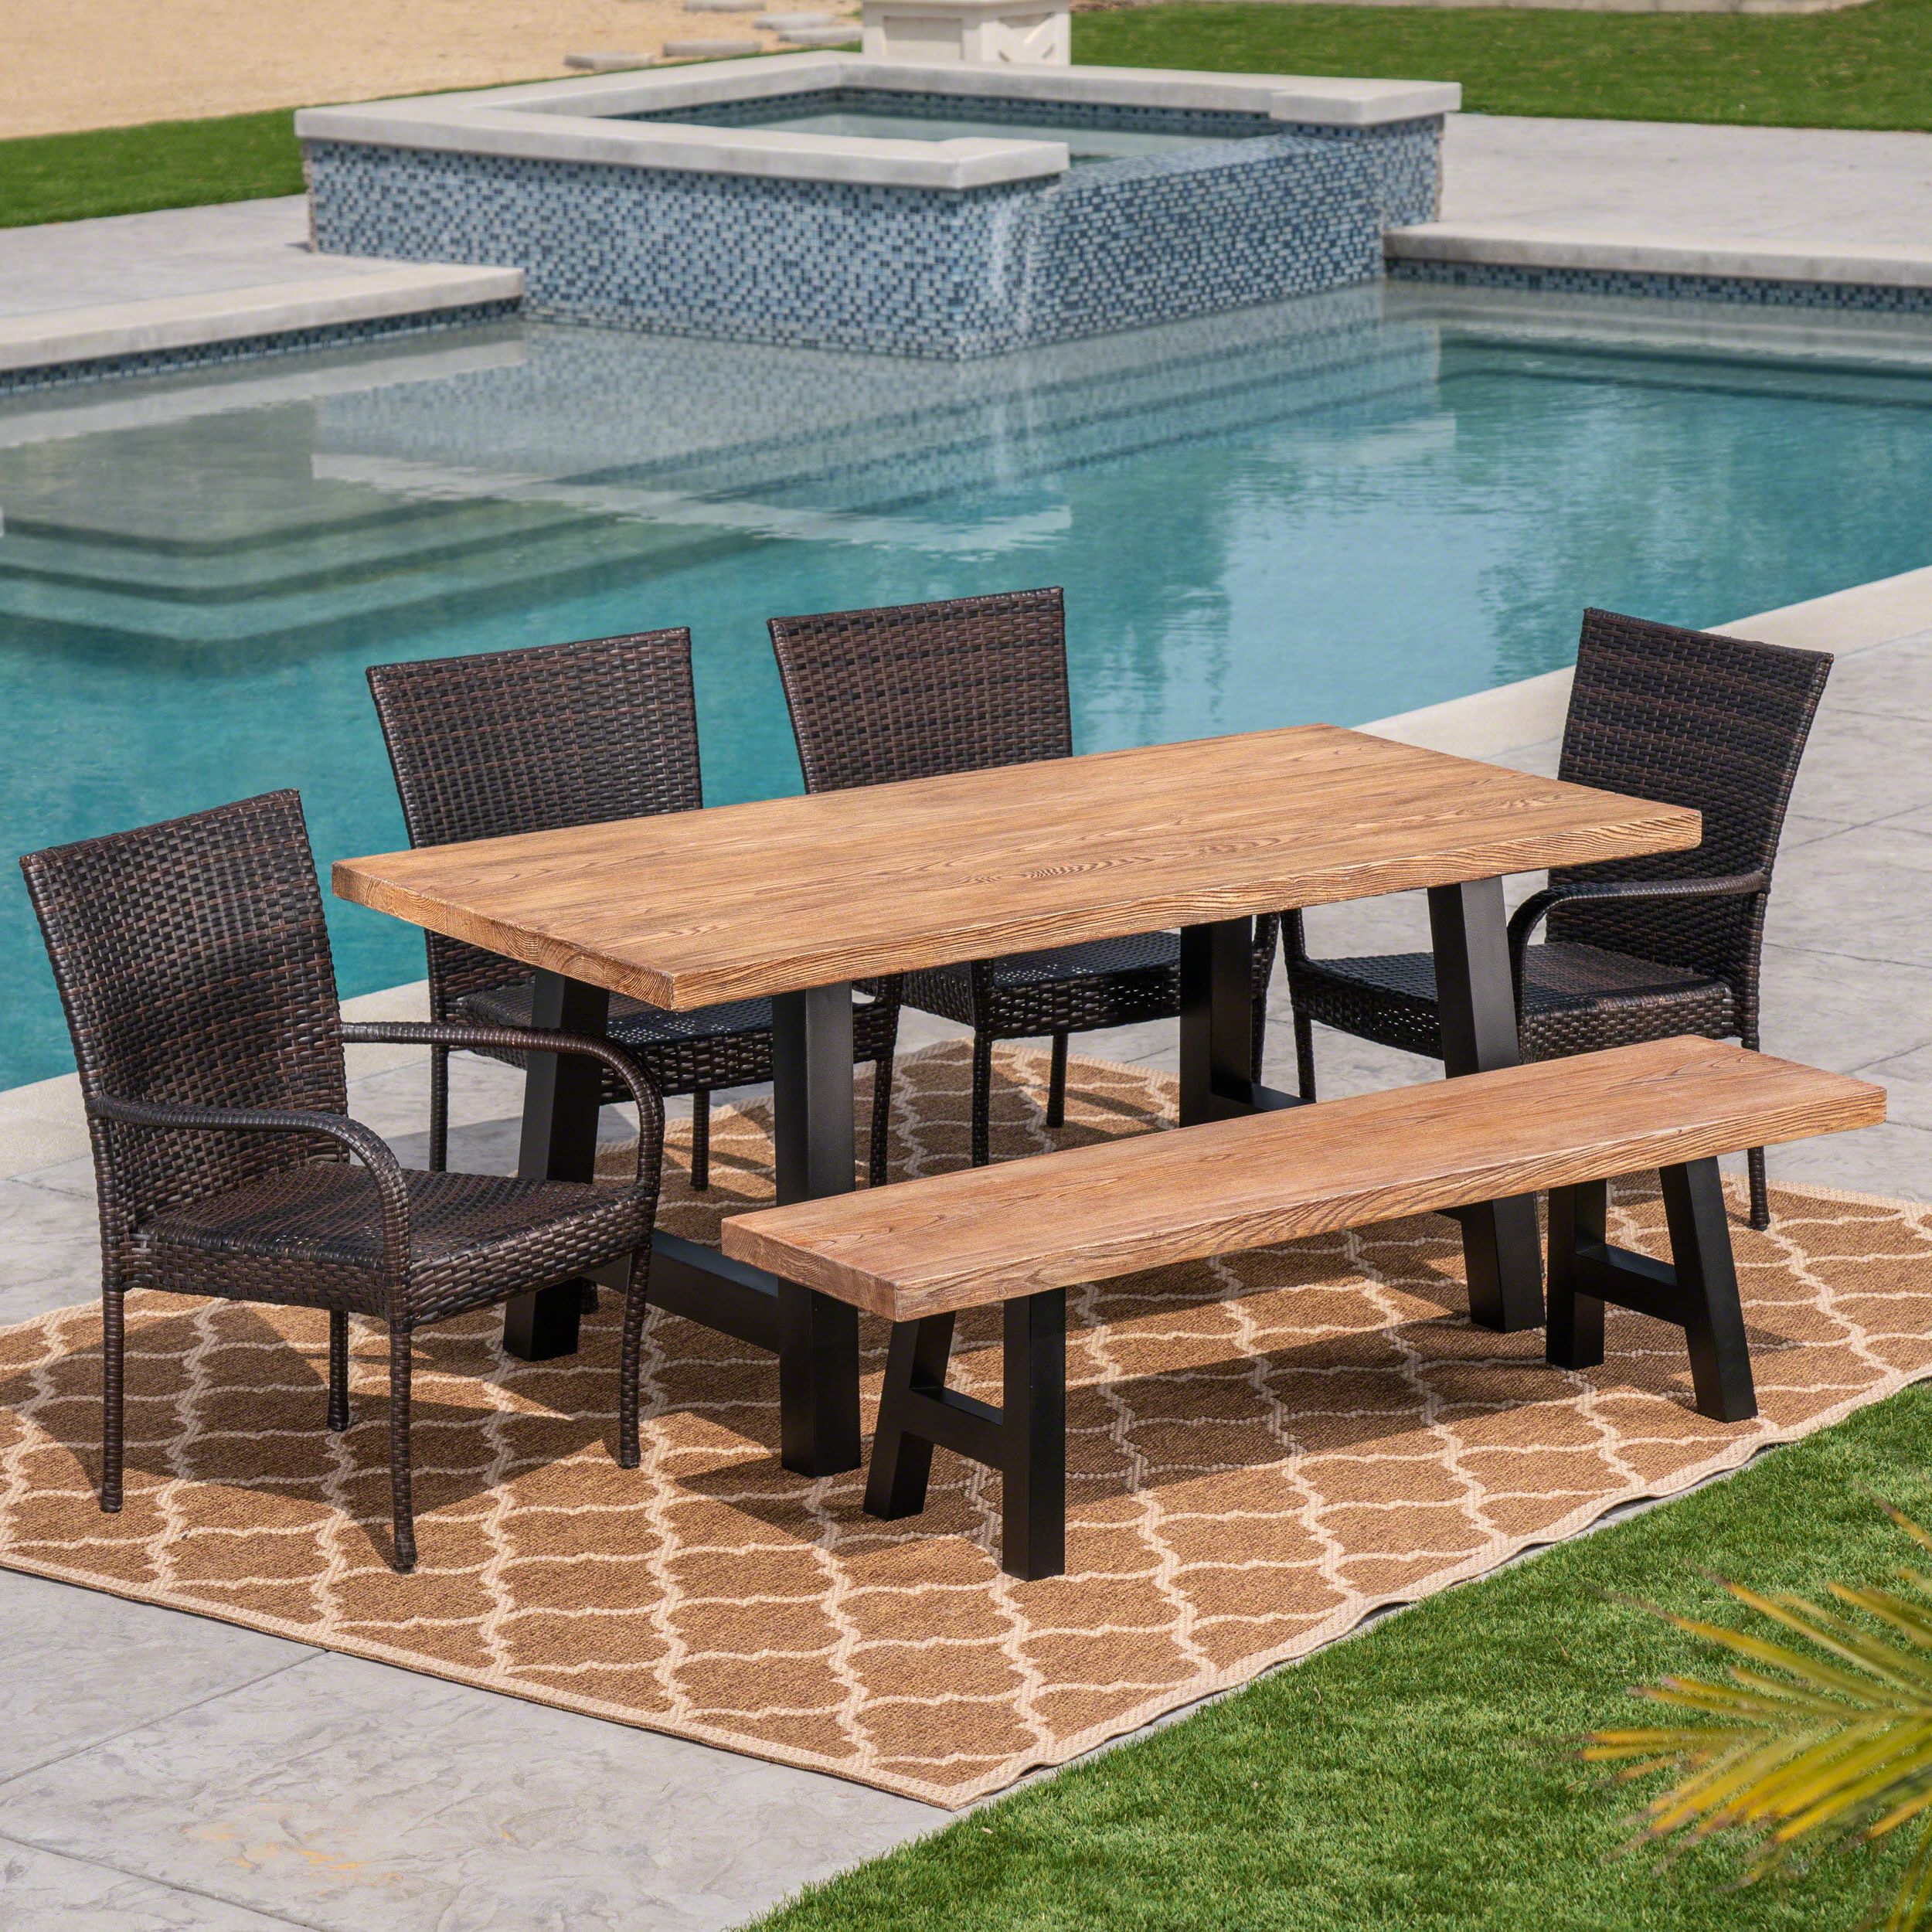 Preferred Natural Woven Modern Outdoor Chairs Sets With Regard To Francis Outdoor 6 Piece Stacking Wicker Dining Set With Light Weight (View 1 of 15)